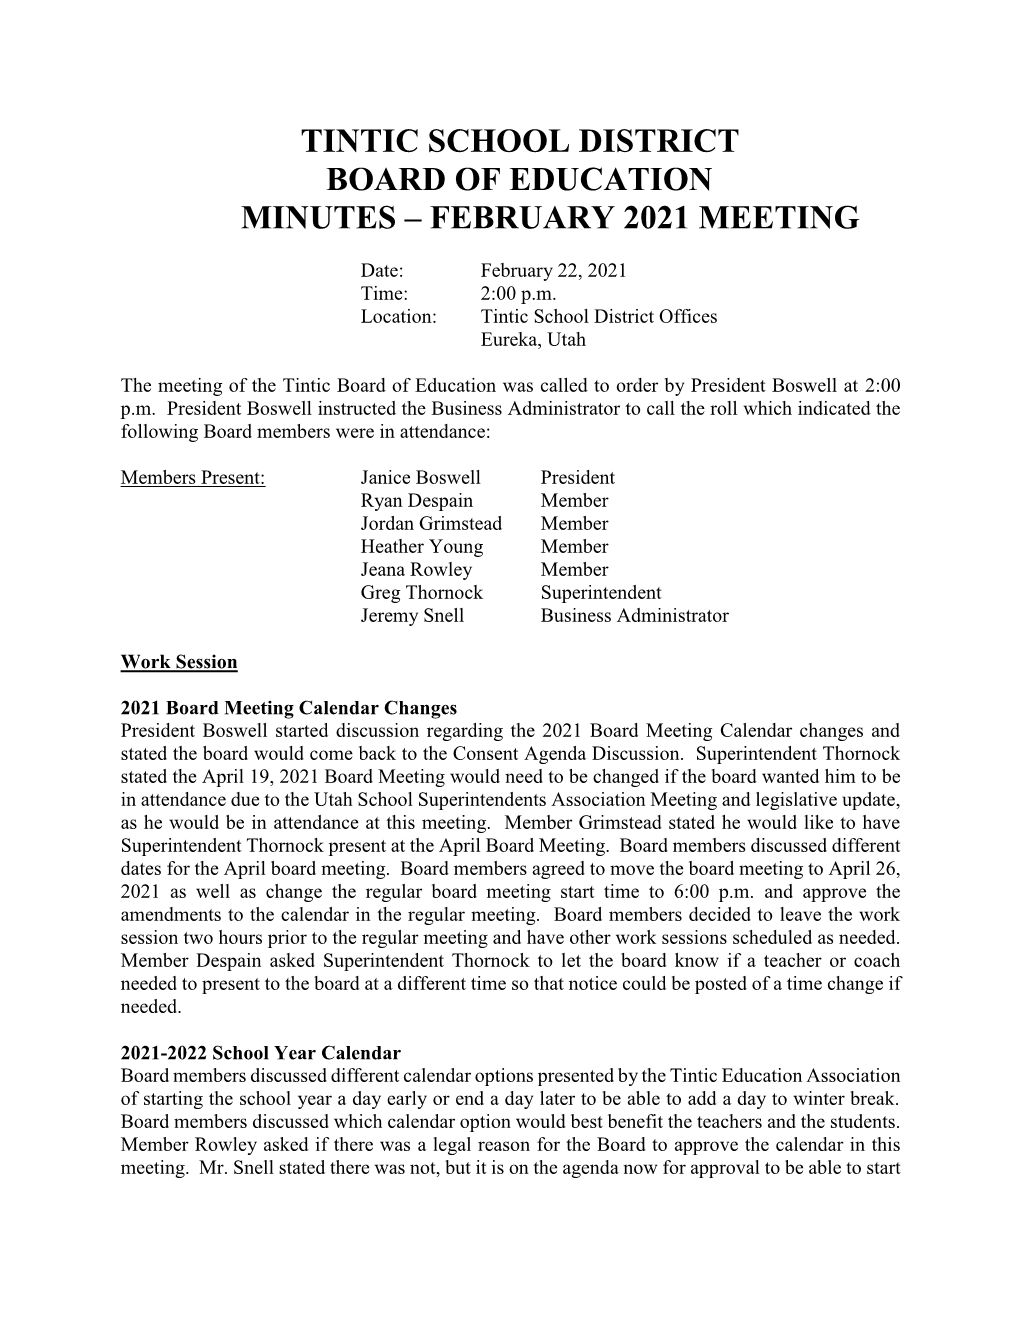 Tintic School District Board of Education Minutes – February 2021 Meeting